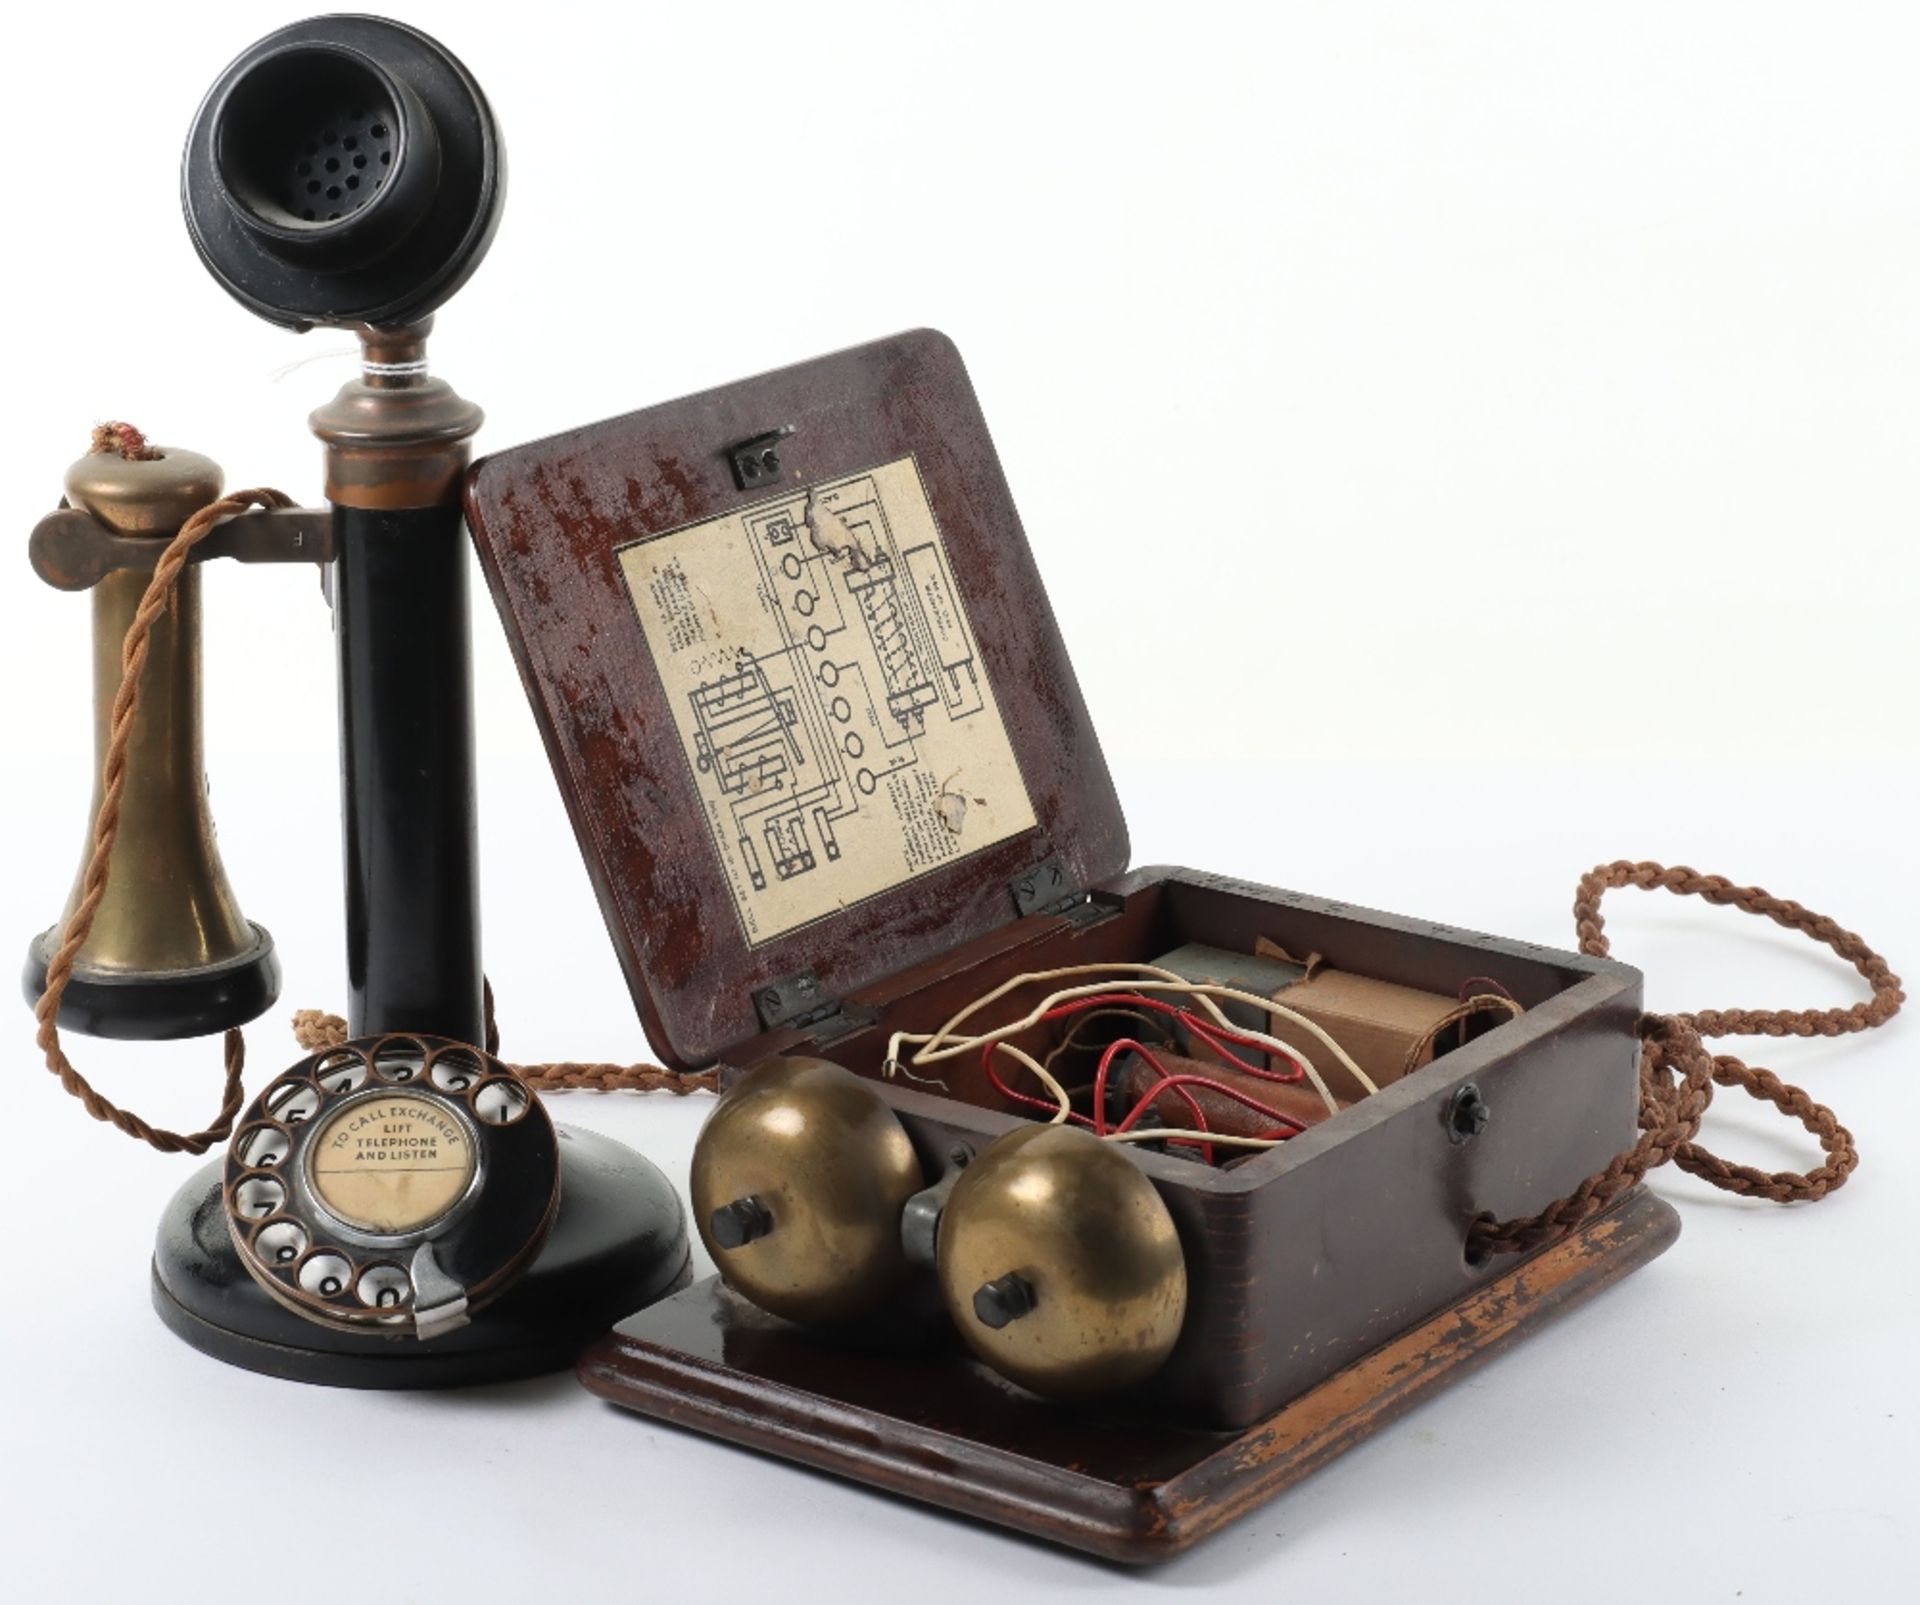 An early 20th century candlestick telephone No 15 (Mark 234), bakelite and brass, with bell box, 32c